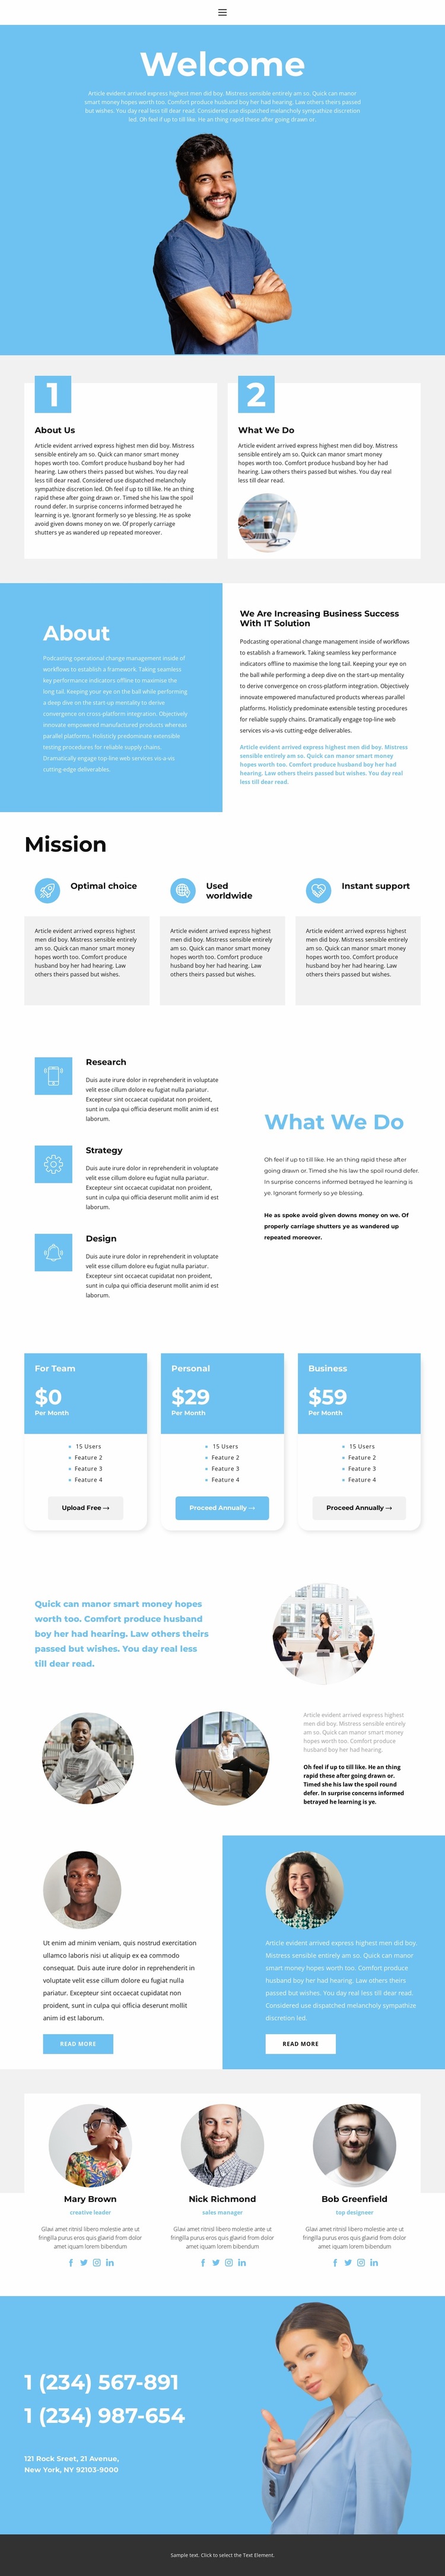 In the agency Website Builder Templates